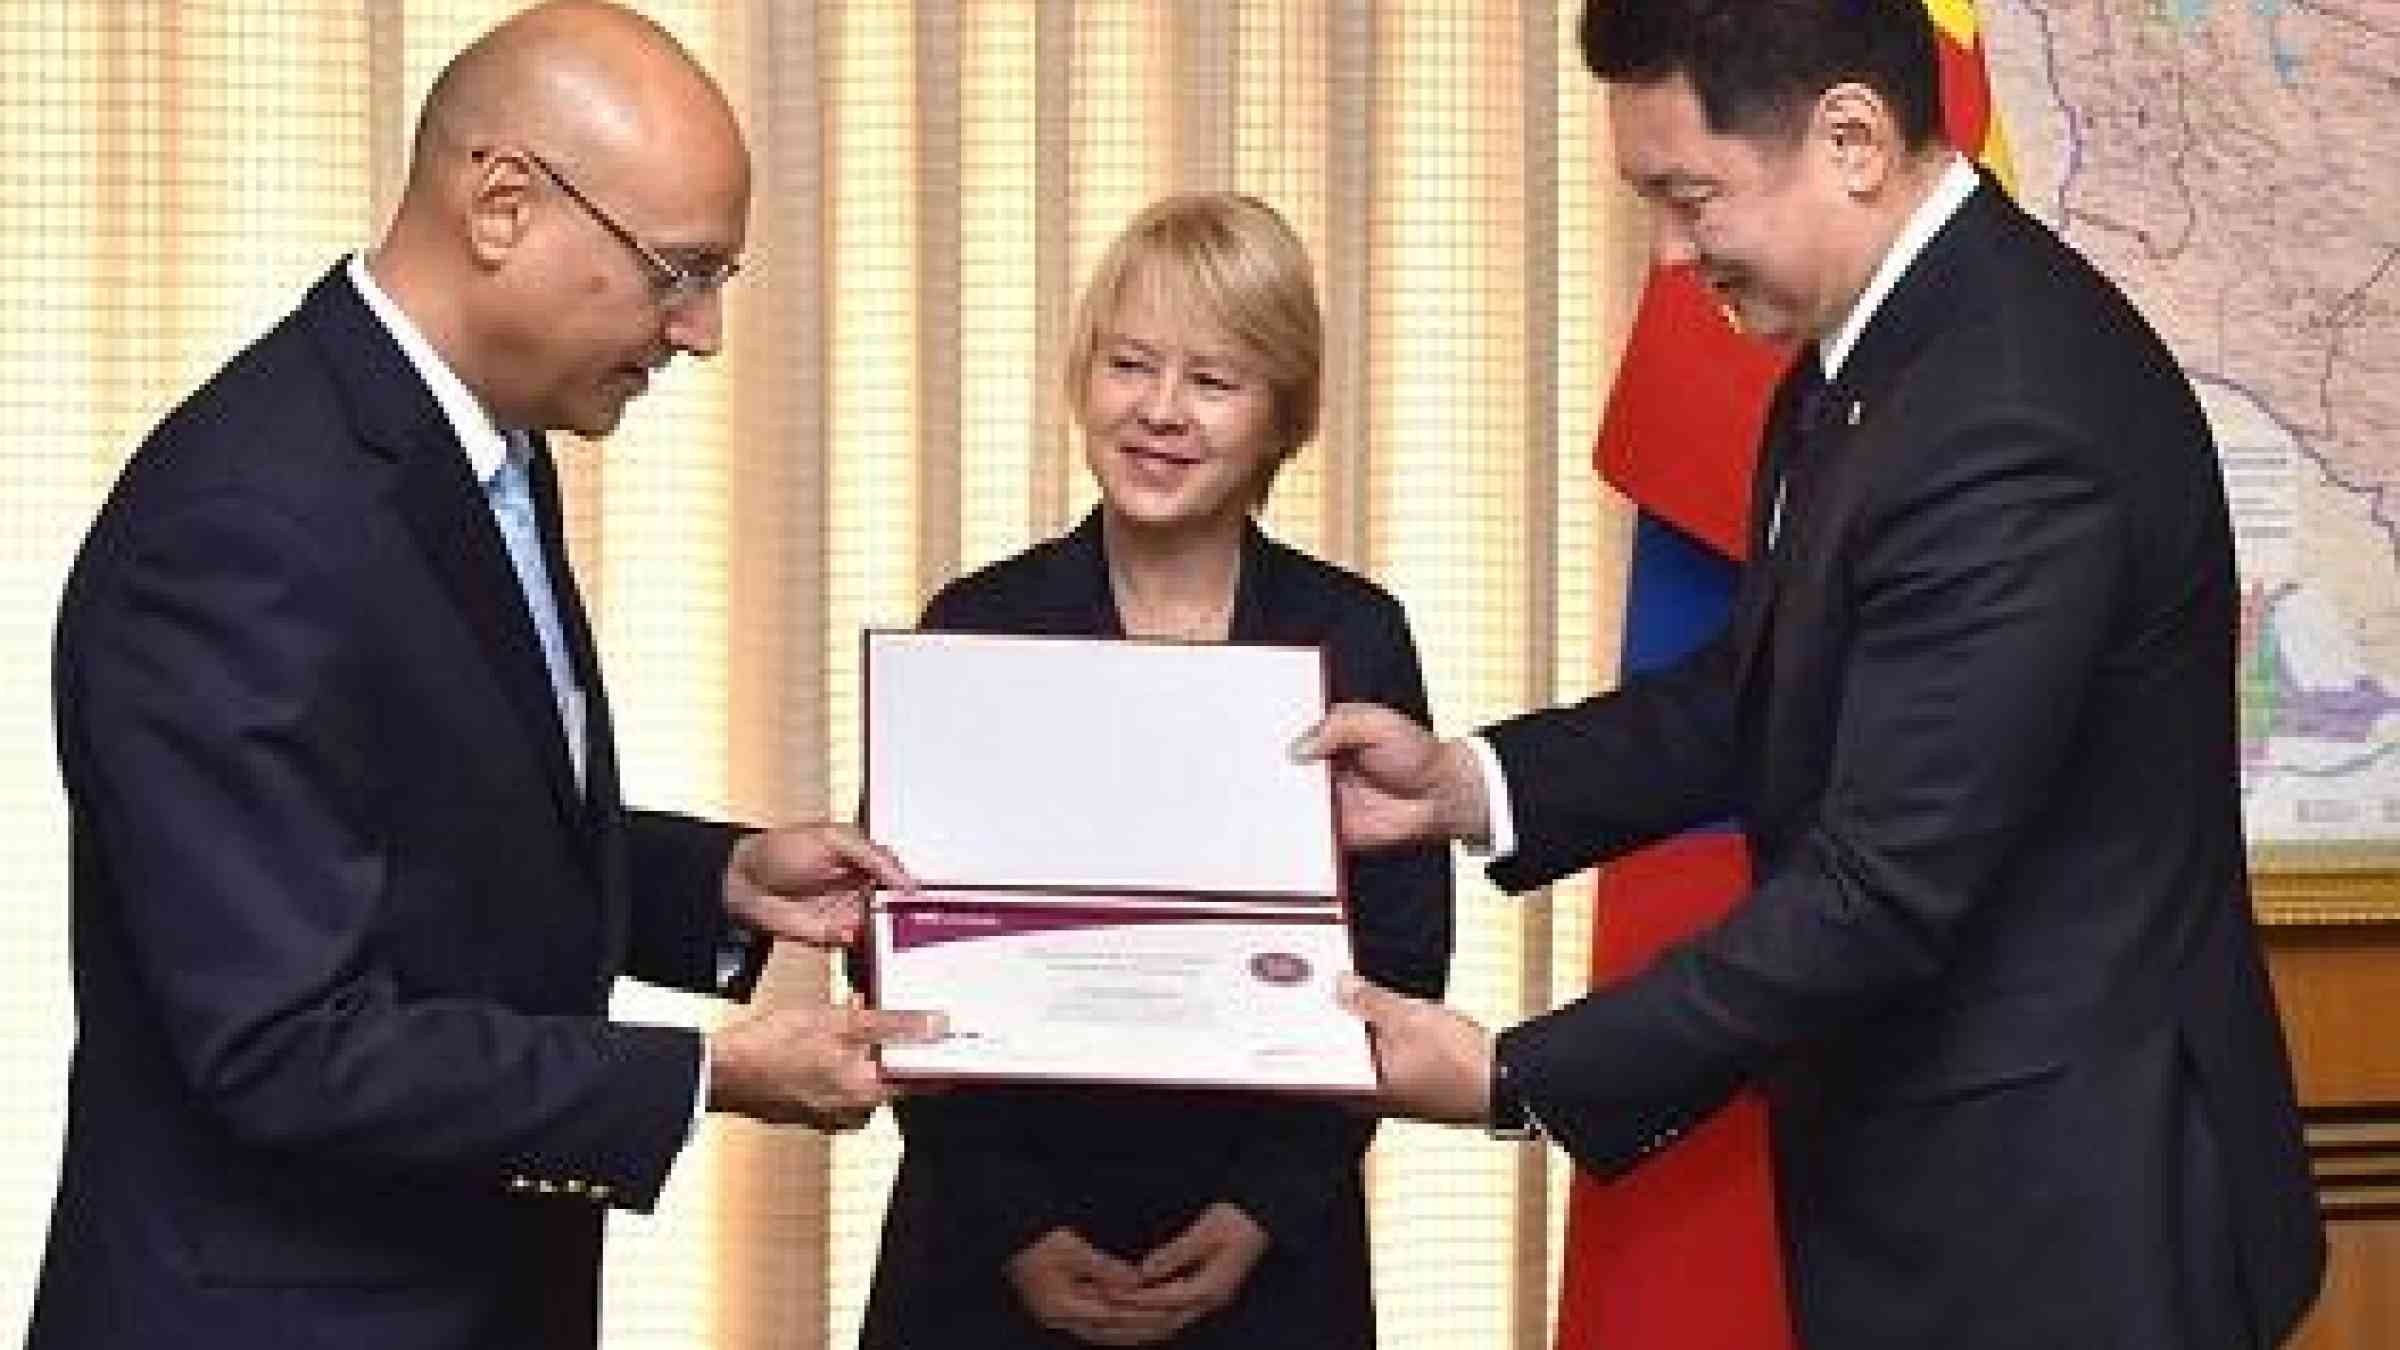 Mr. Sanjaya Bhatia (left), Head of UNISDR ONEA-GETI, receives the signing certificate of Ulaanbaatar, Darkhan and Erdenet cities  from Mr. Ukhnaa Khurelsukh, Deputy Prime Minister of Mongolia, in the presence of Ms. Beate Trankmann, UN Resident Coordinator and UNDP Resident Representative in Mongolia.